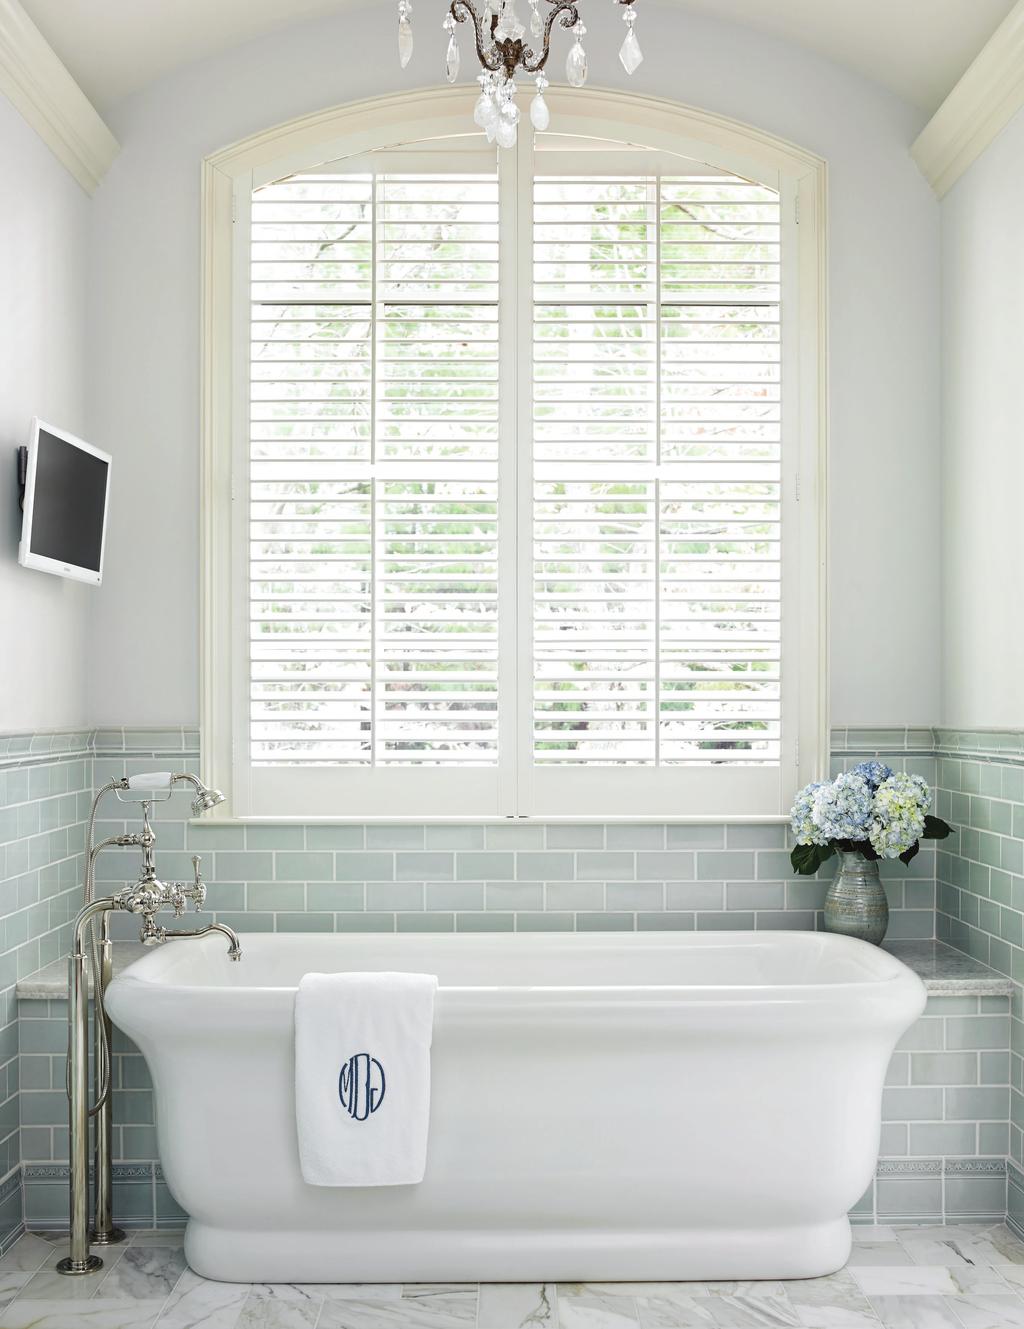 THIS PHOTO: Nestled in a sunlit nook, this sculptural tub is ideal for soothing soaks.